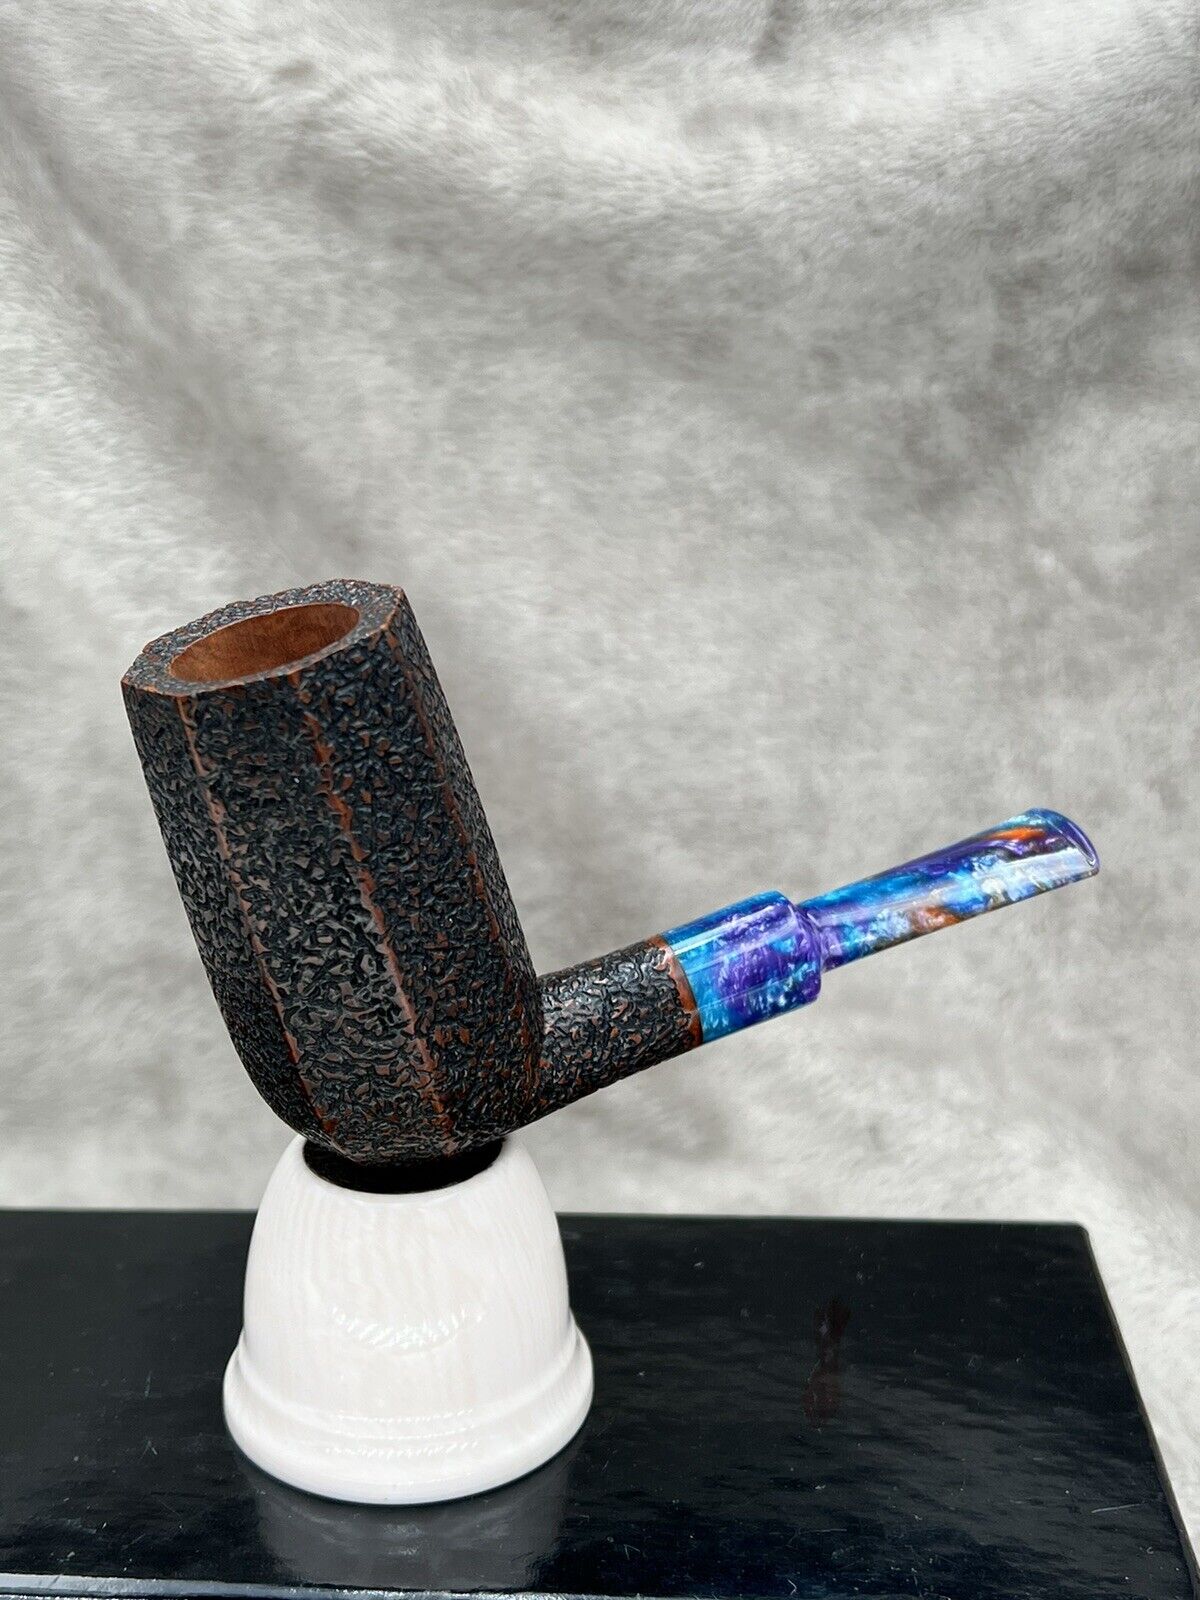 Stunning Unsmoked “Lucky Pipes” Made By Dan Knop Beautiful Little Pipe